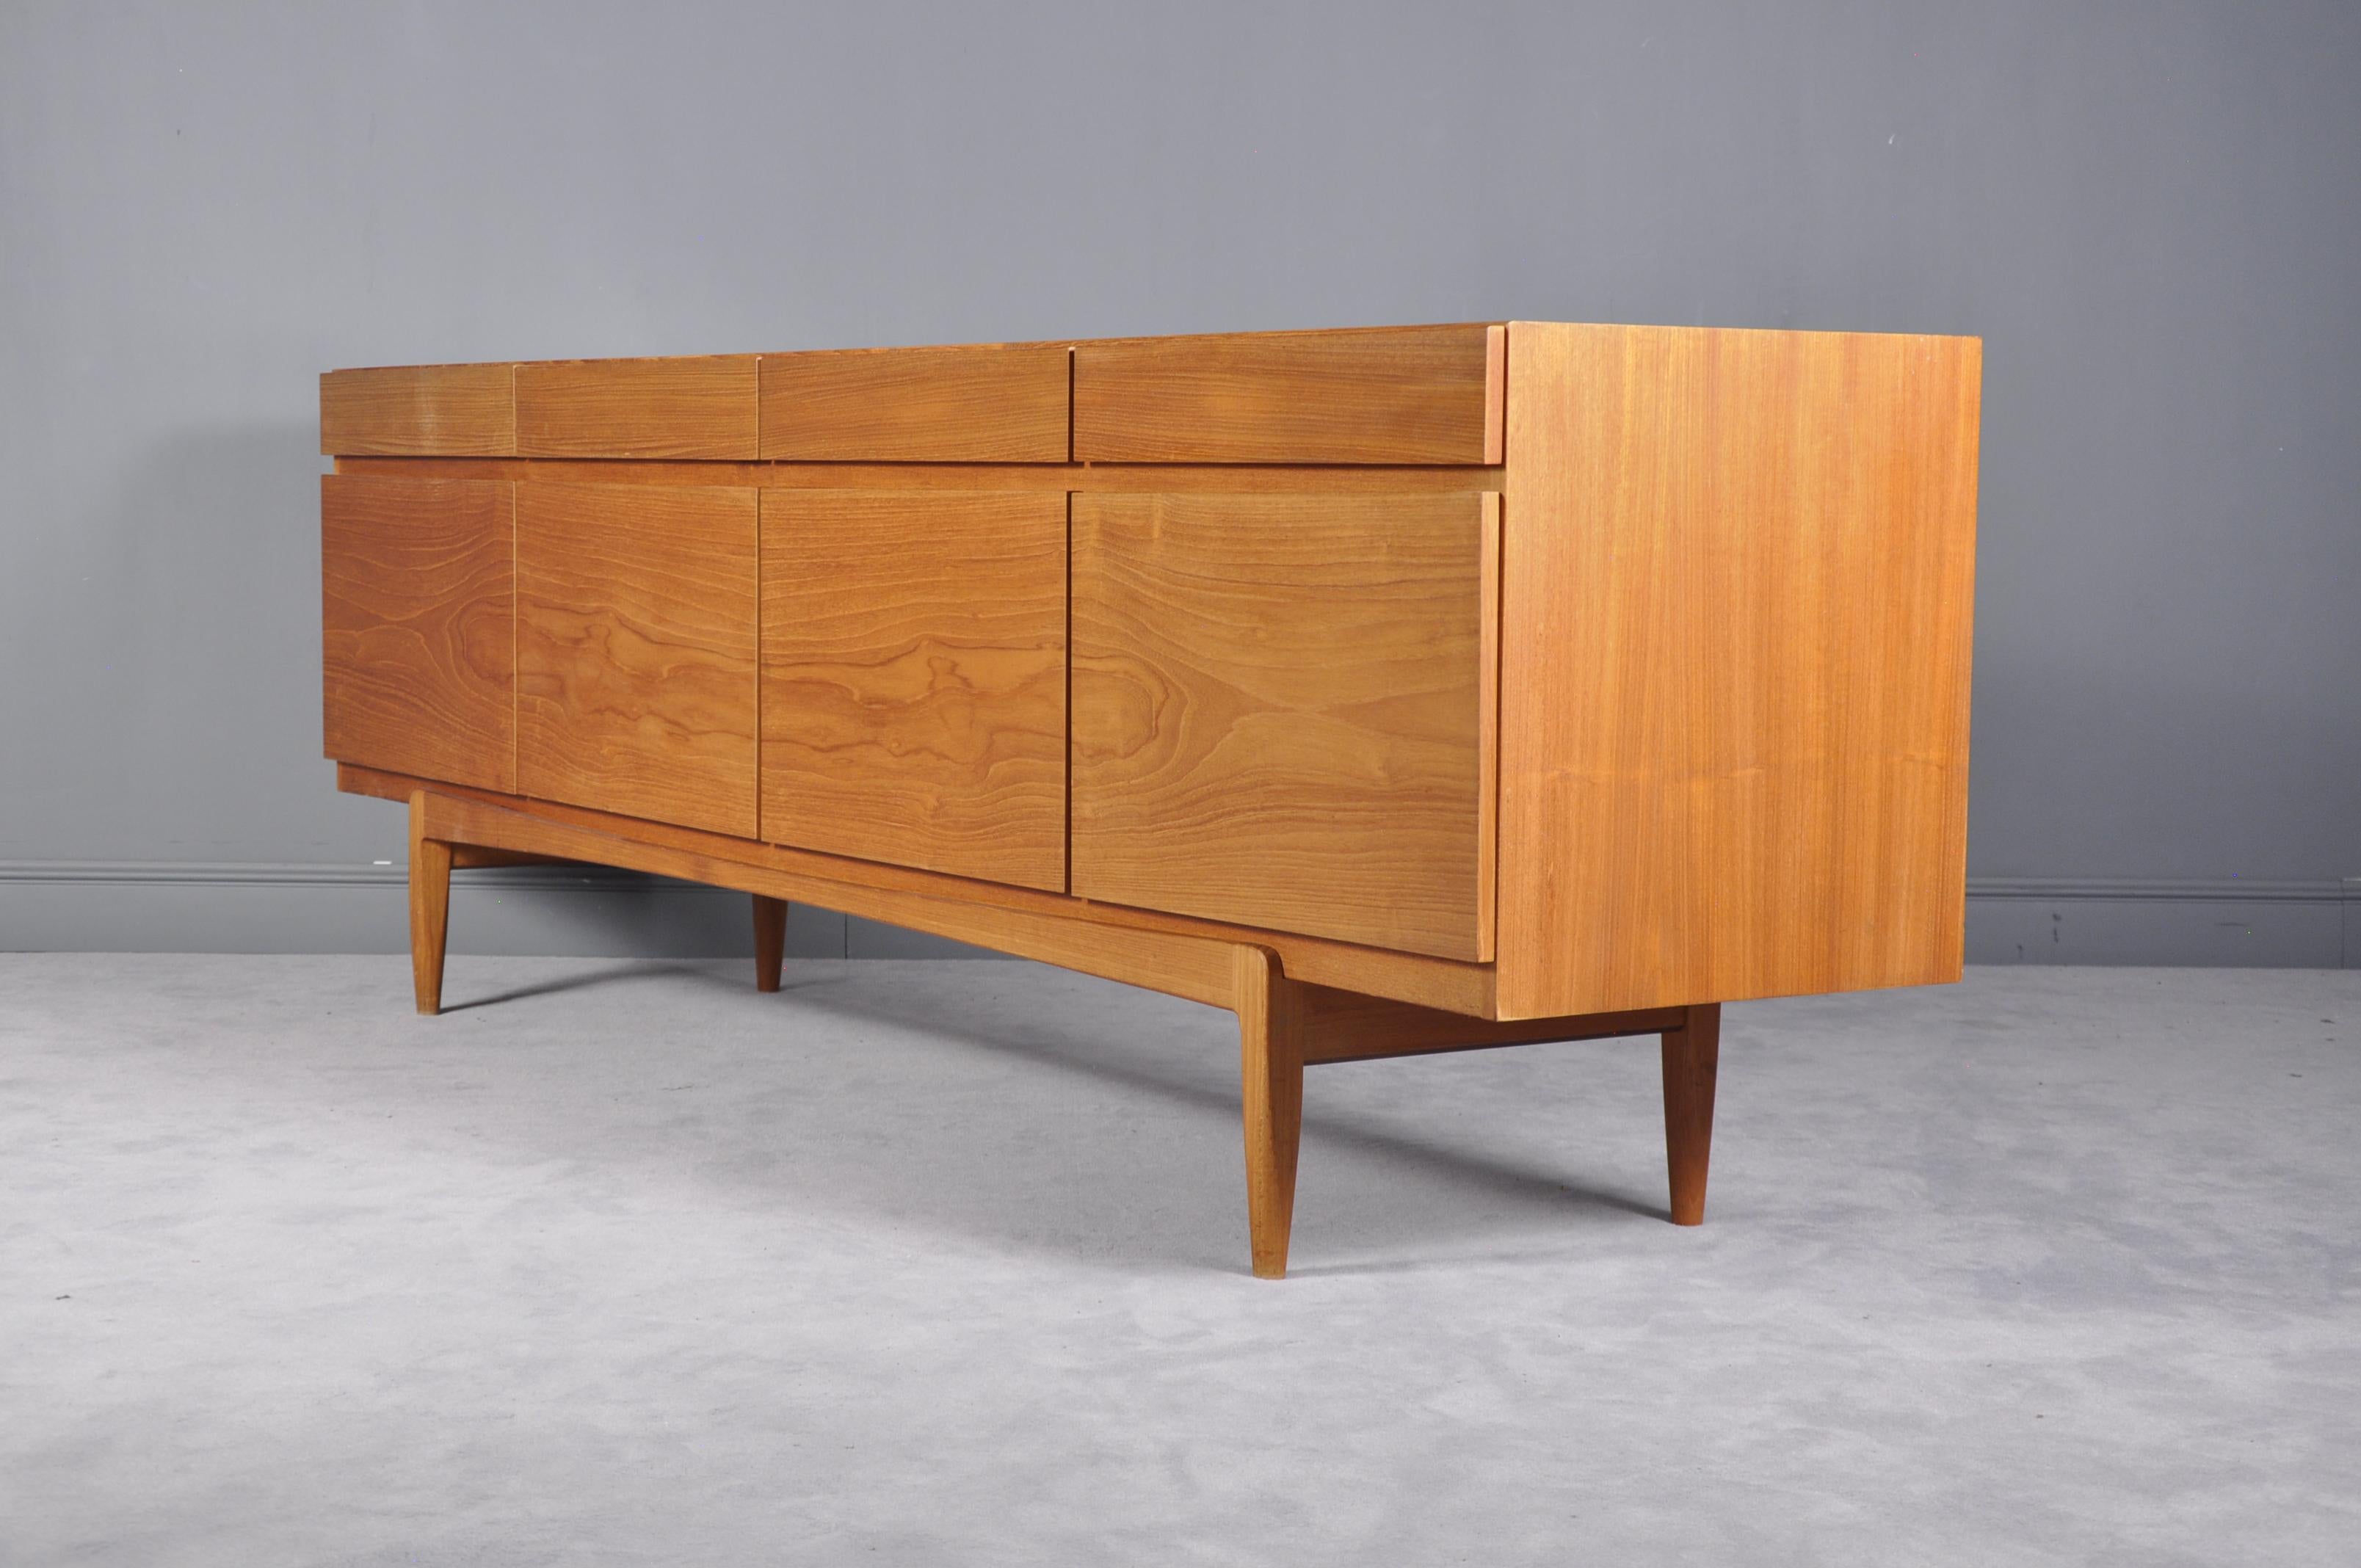 A beautiful sideboard/credenza in teak. Design by Ib Kofod-Larsen. Manufactured by Faarup Denmark. Model no.66. Behind the doors with shelves and drawers.

On this sideboard, natural wood grain is utilized to create a sense of unity in its